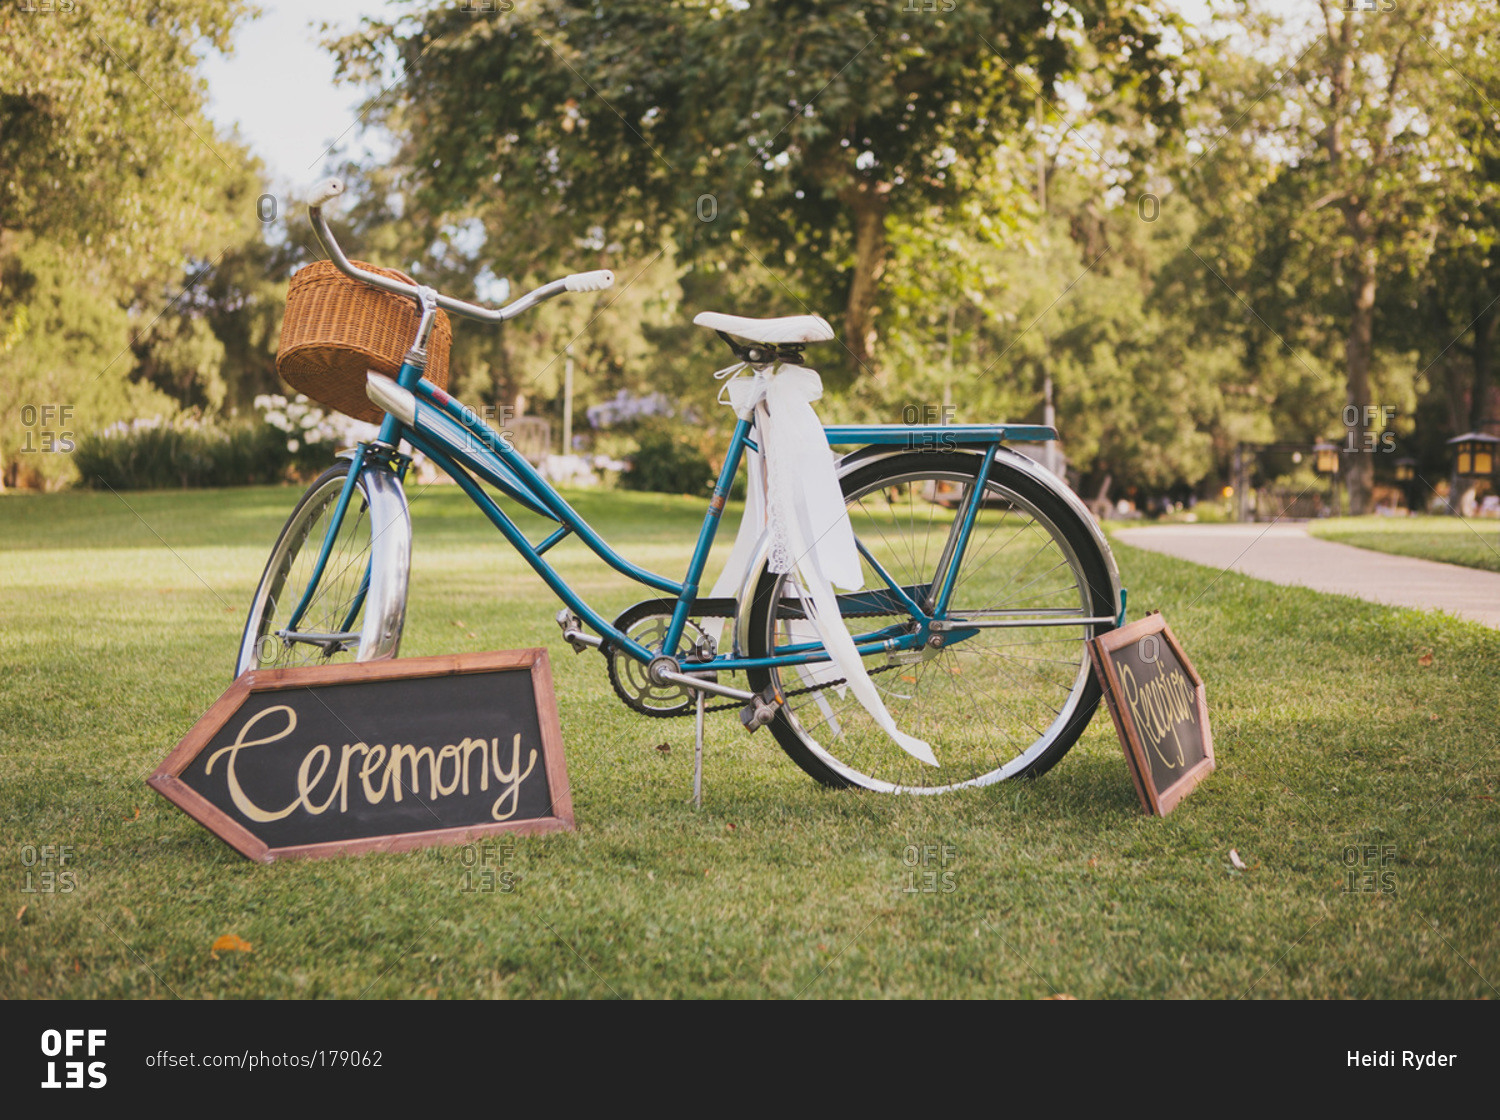 Bicycle in a park signaling wedding ceremony